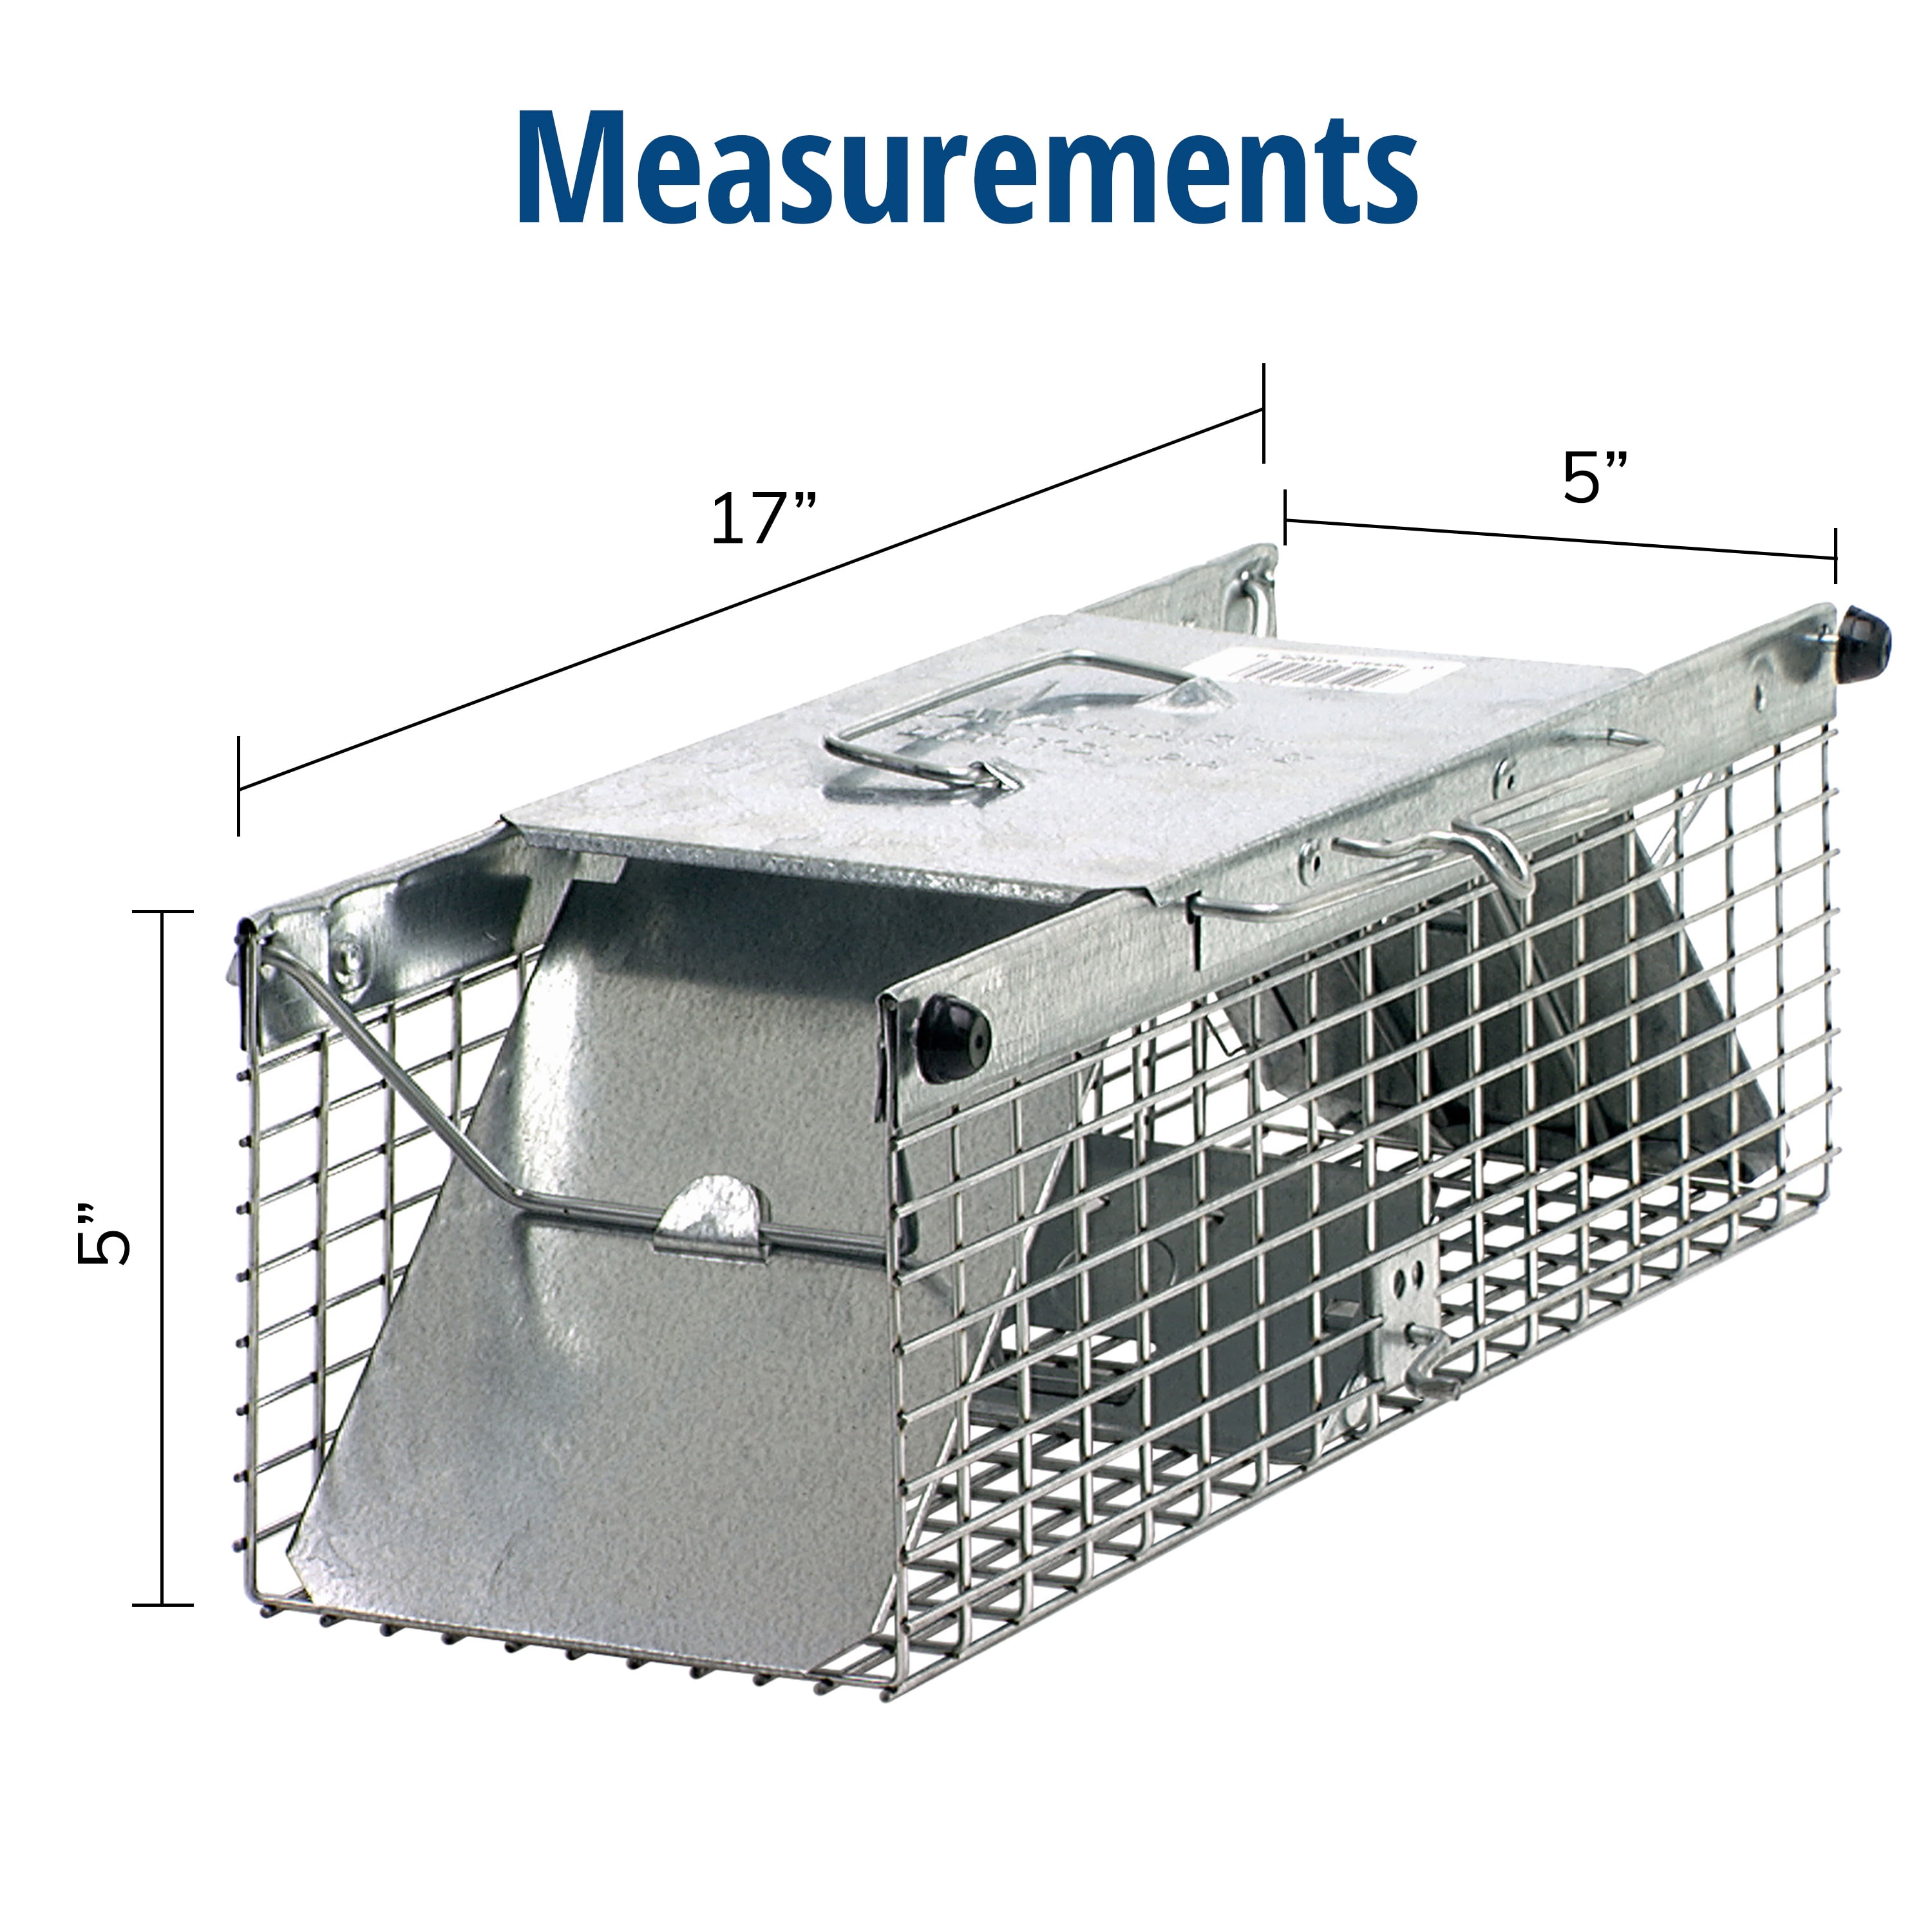 Havahart 1025 Small 2-Door Live Animal Trap Weasels Chipmunks Ideal for catching Squirrels Rats Pack of 2